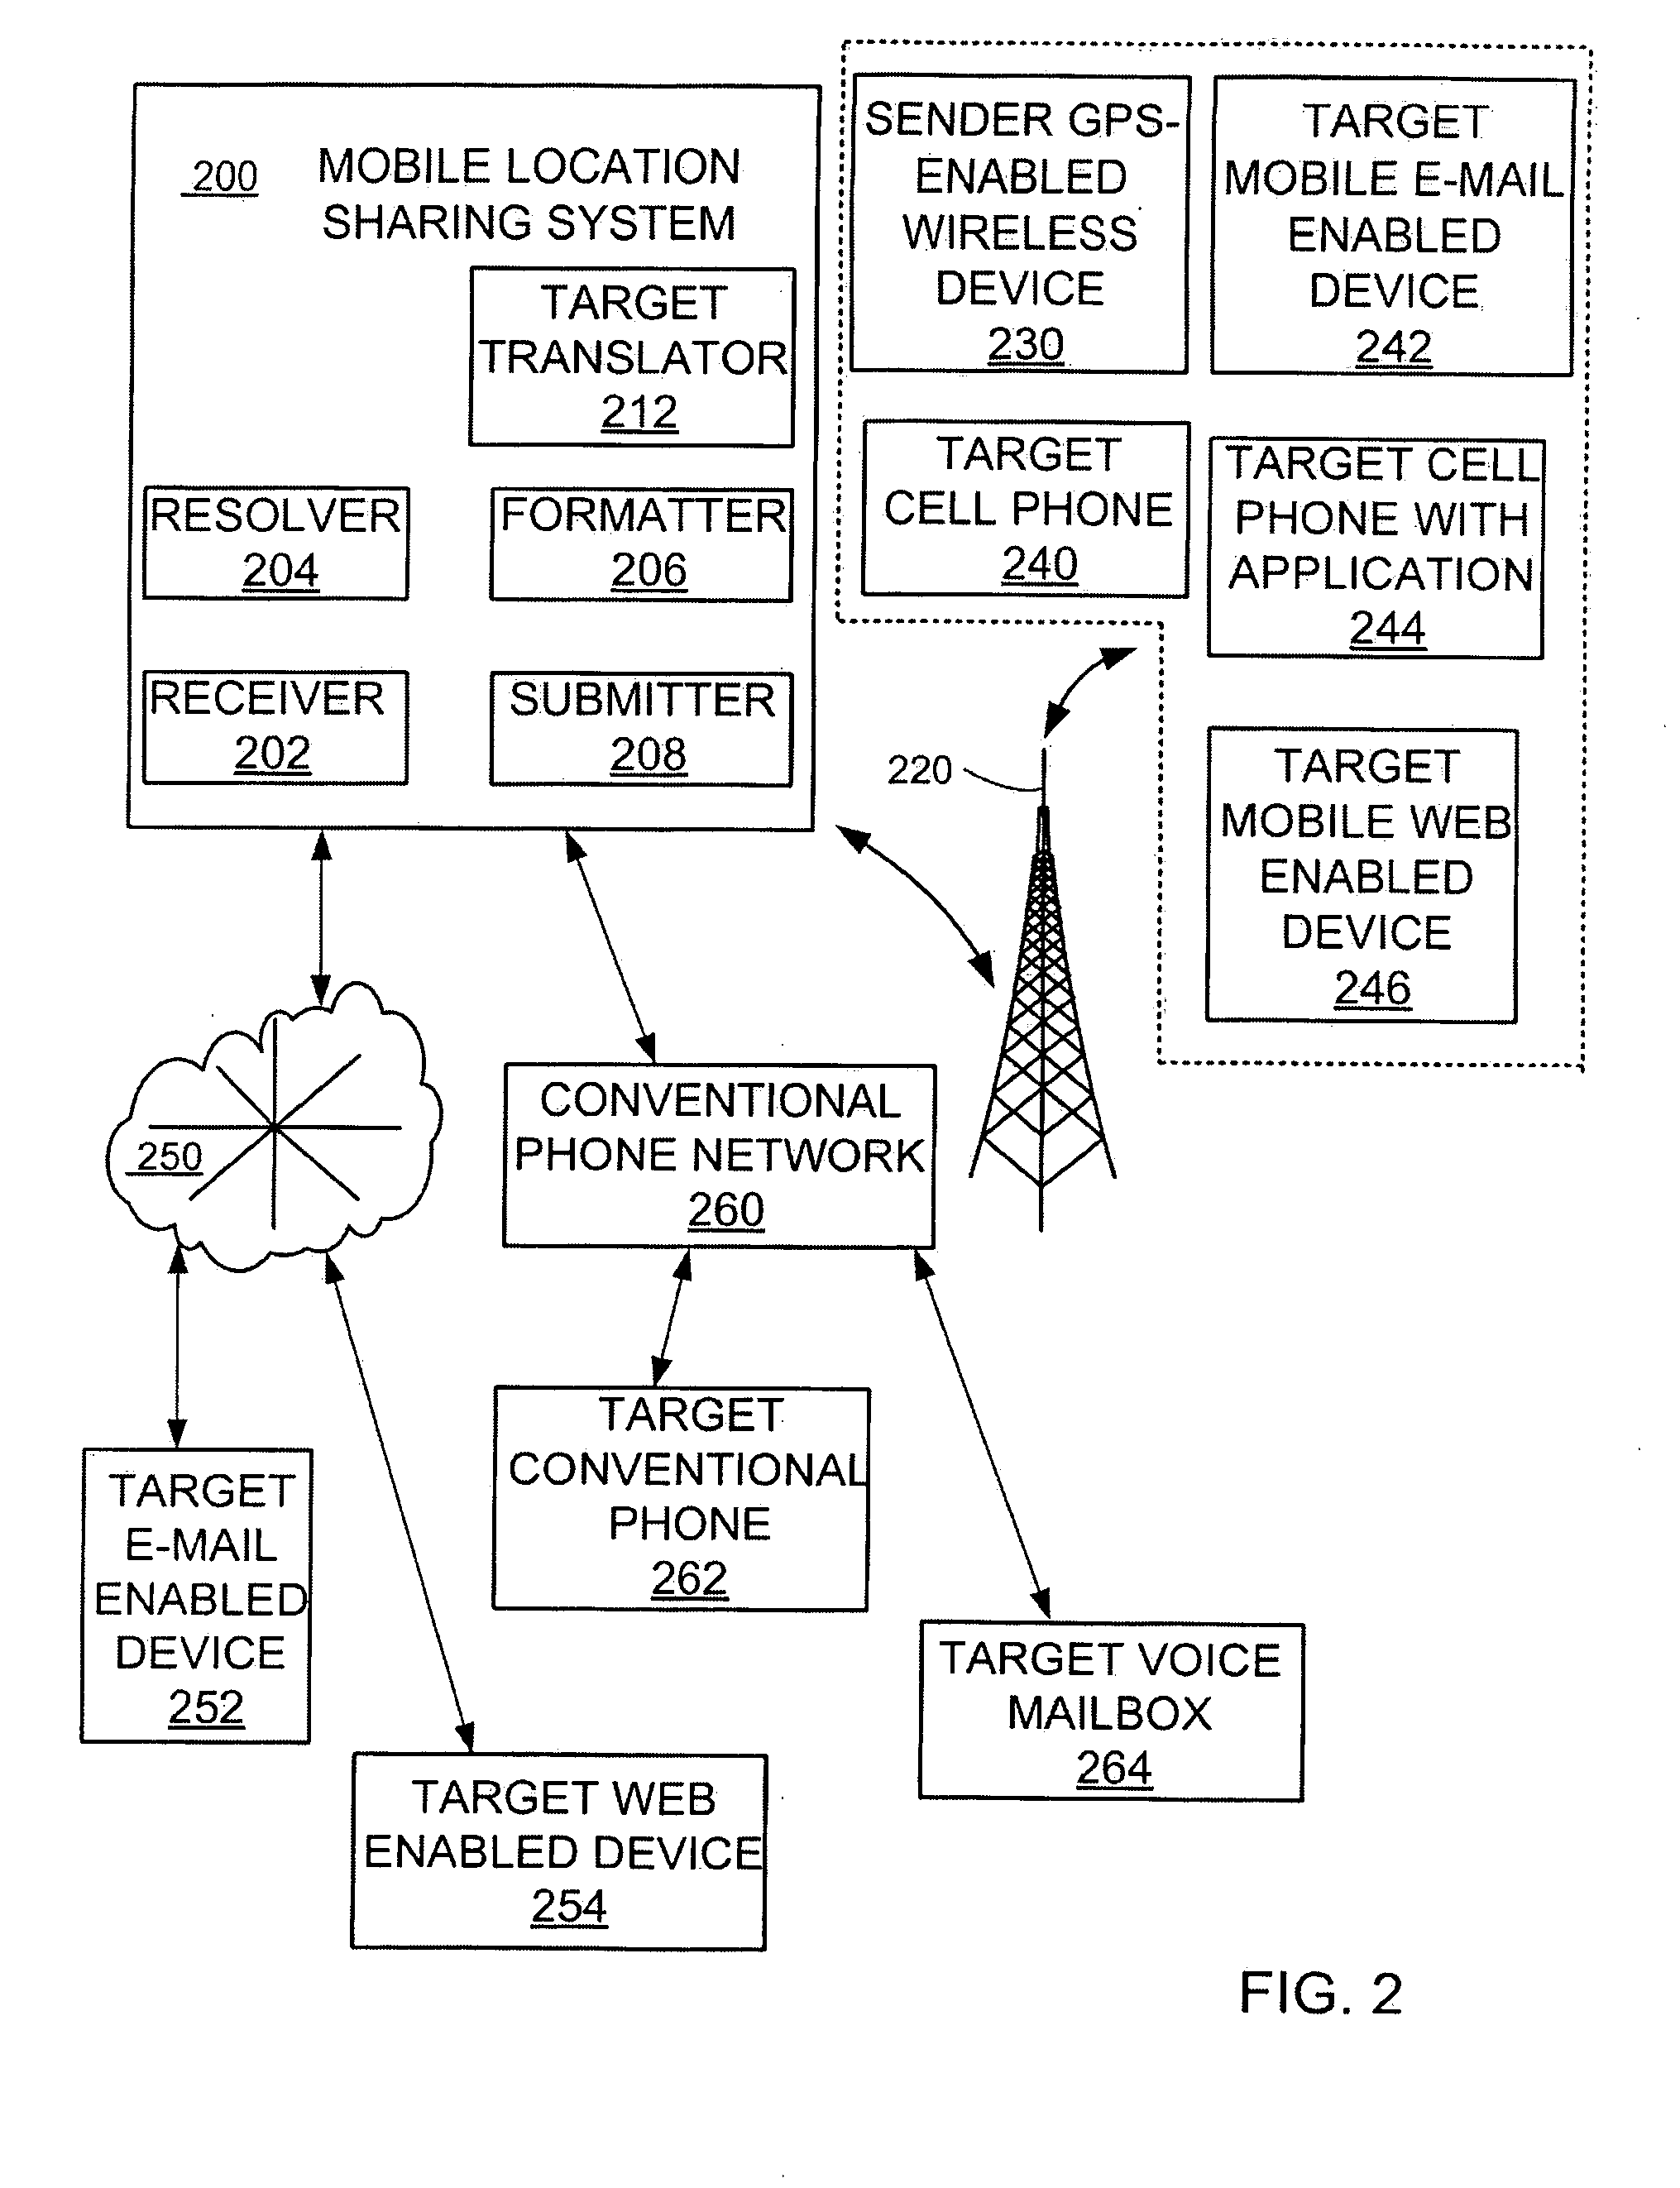 Mobile Location Sharing System